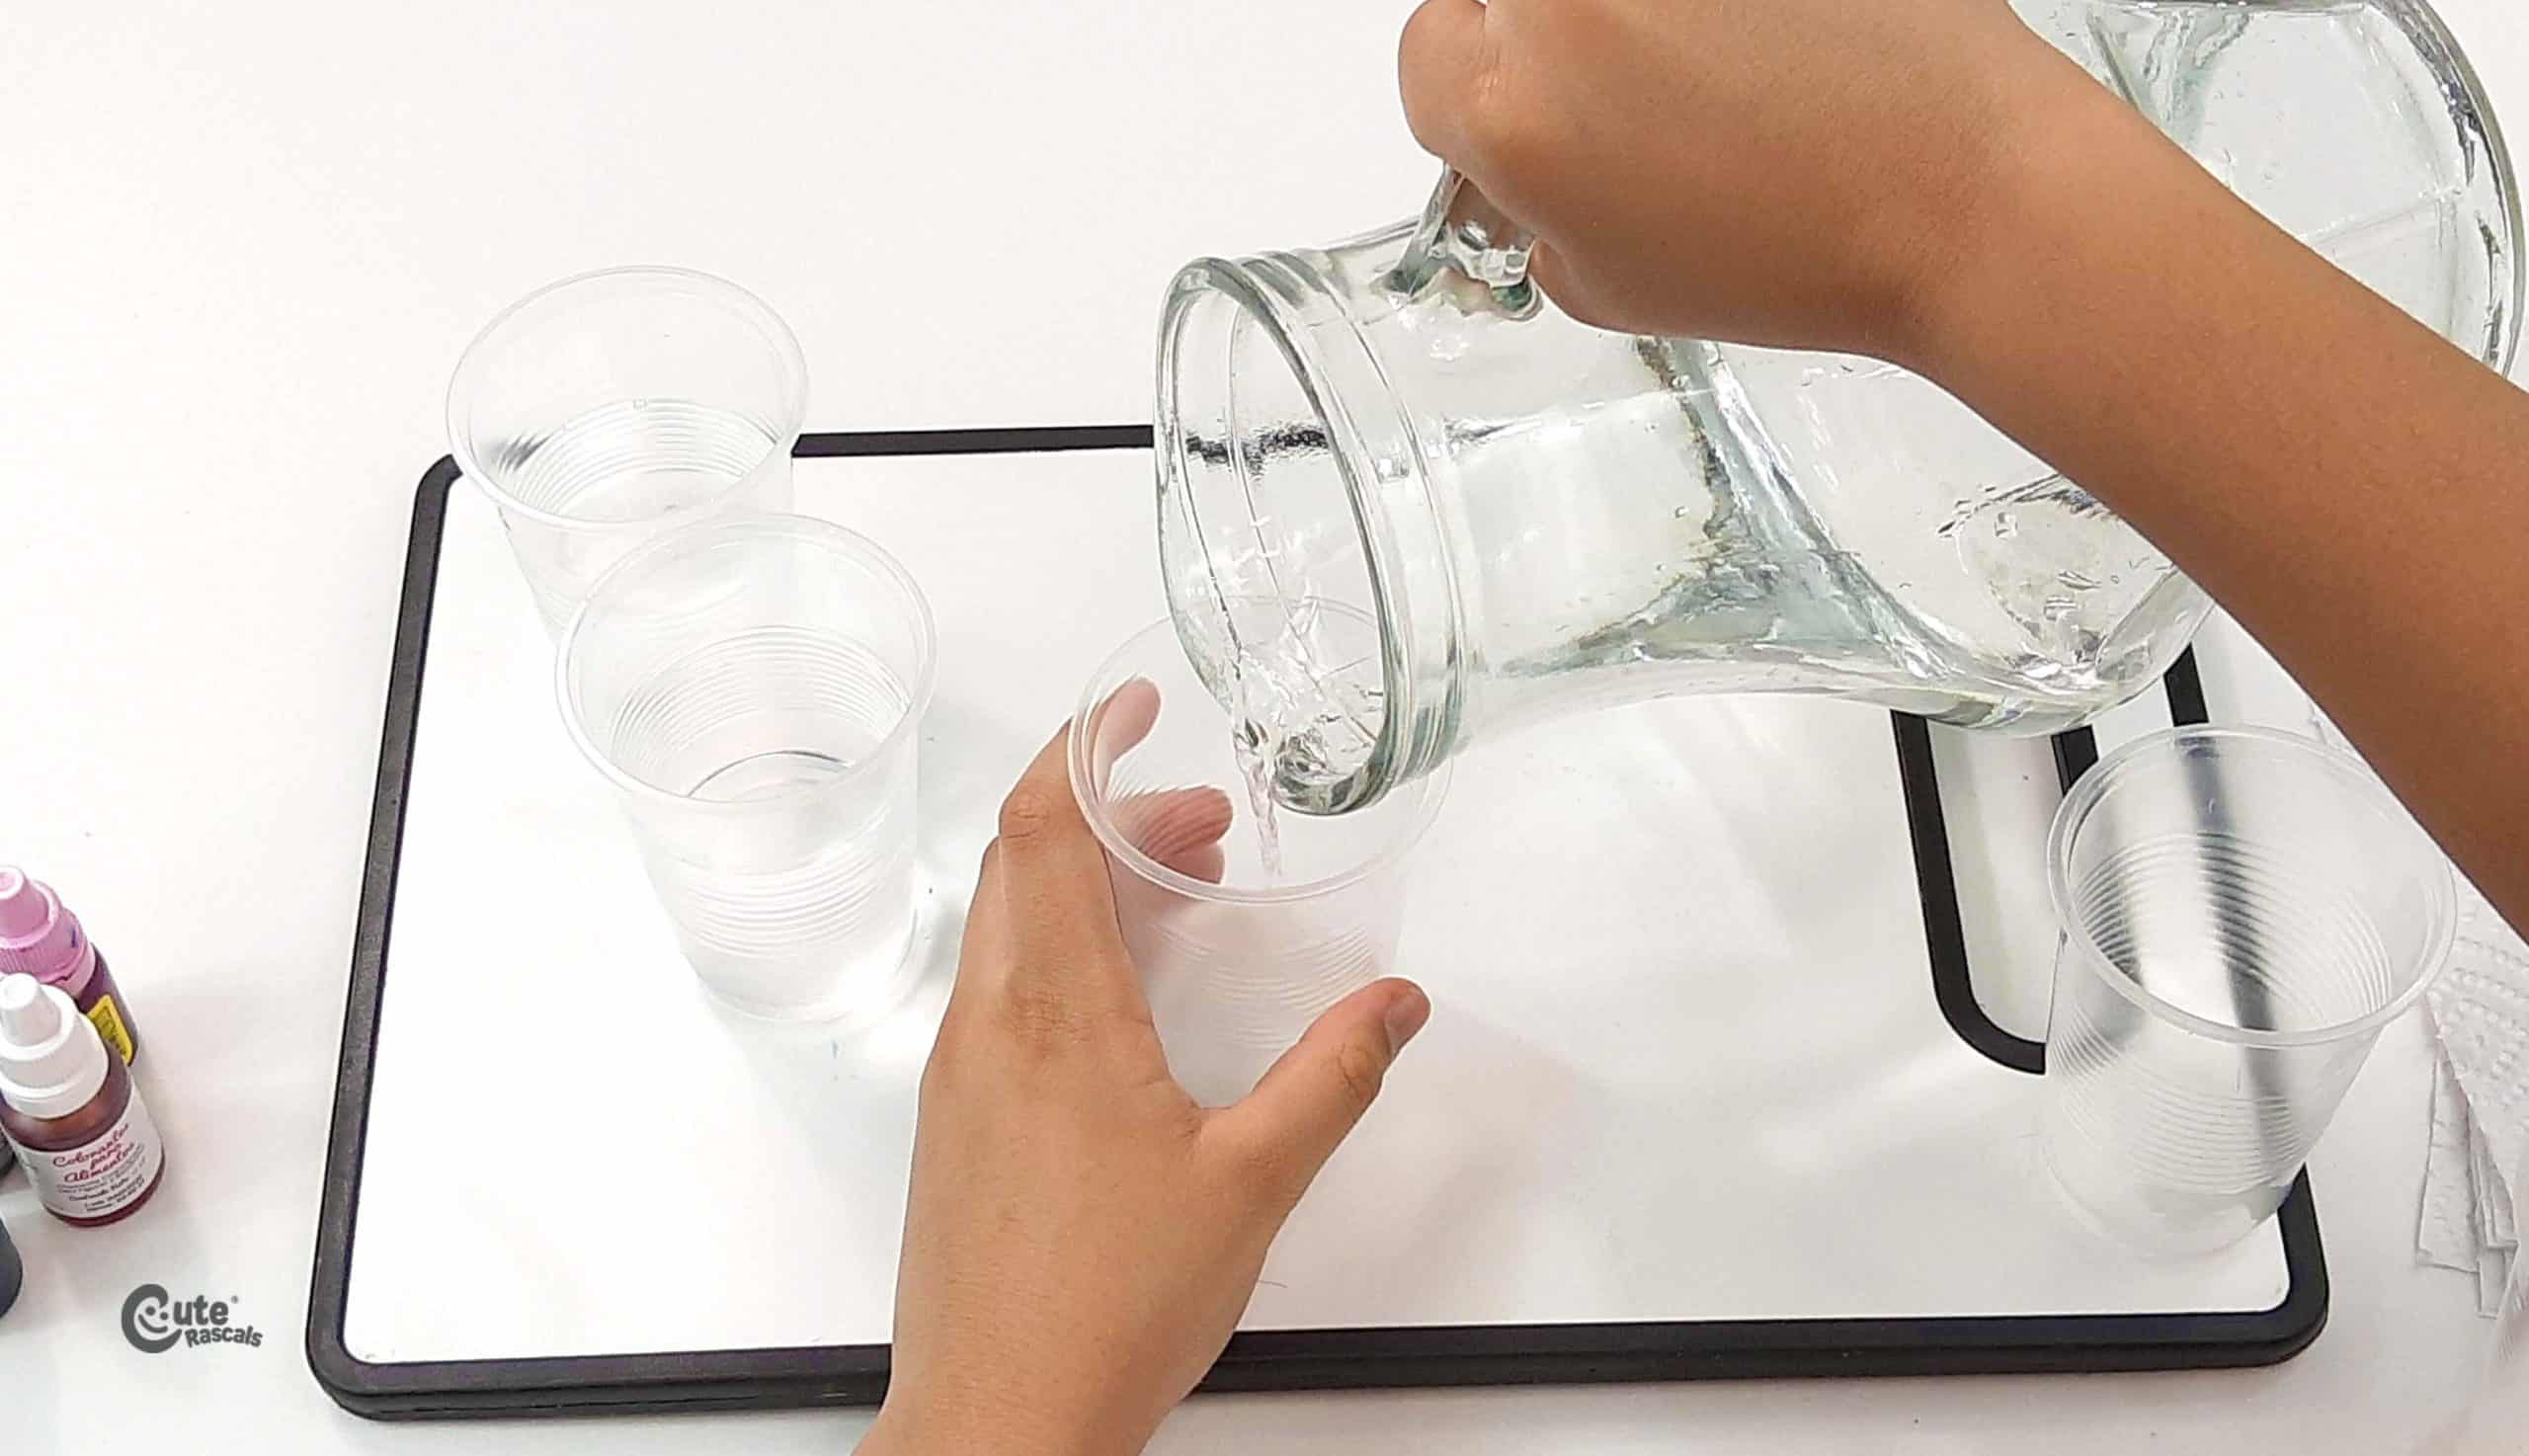 Pour water into four of the plastic cups